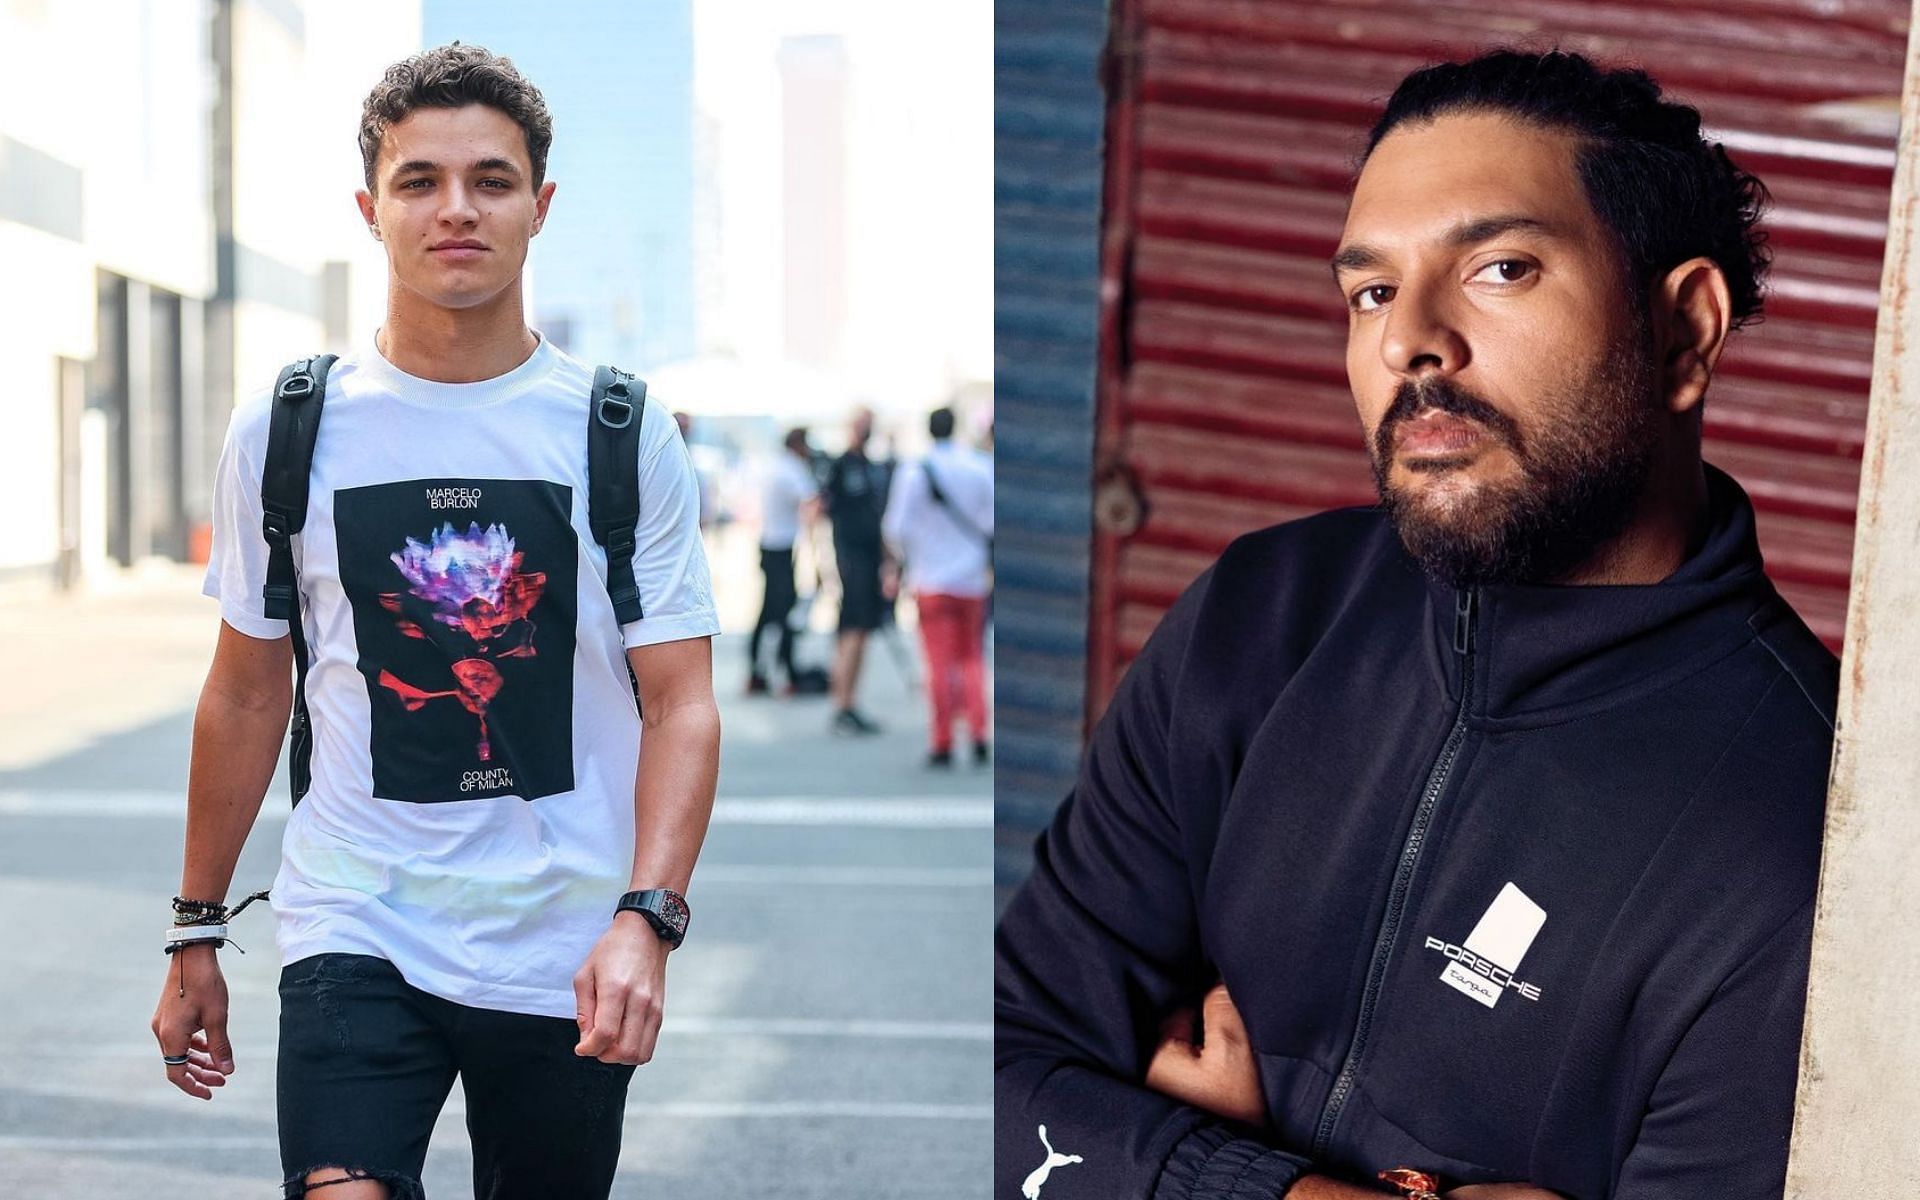 Lando Norris (left) and Yuvraj Singh (right) (Images sourced from their official Instagram profiles)